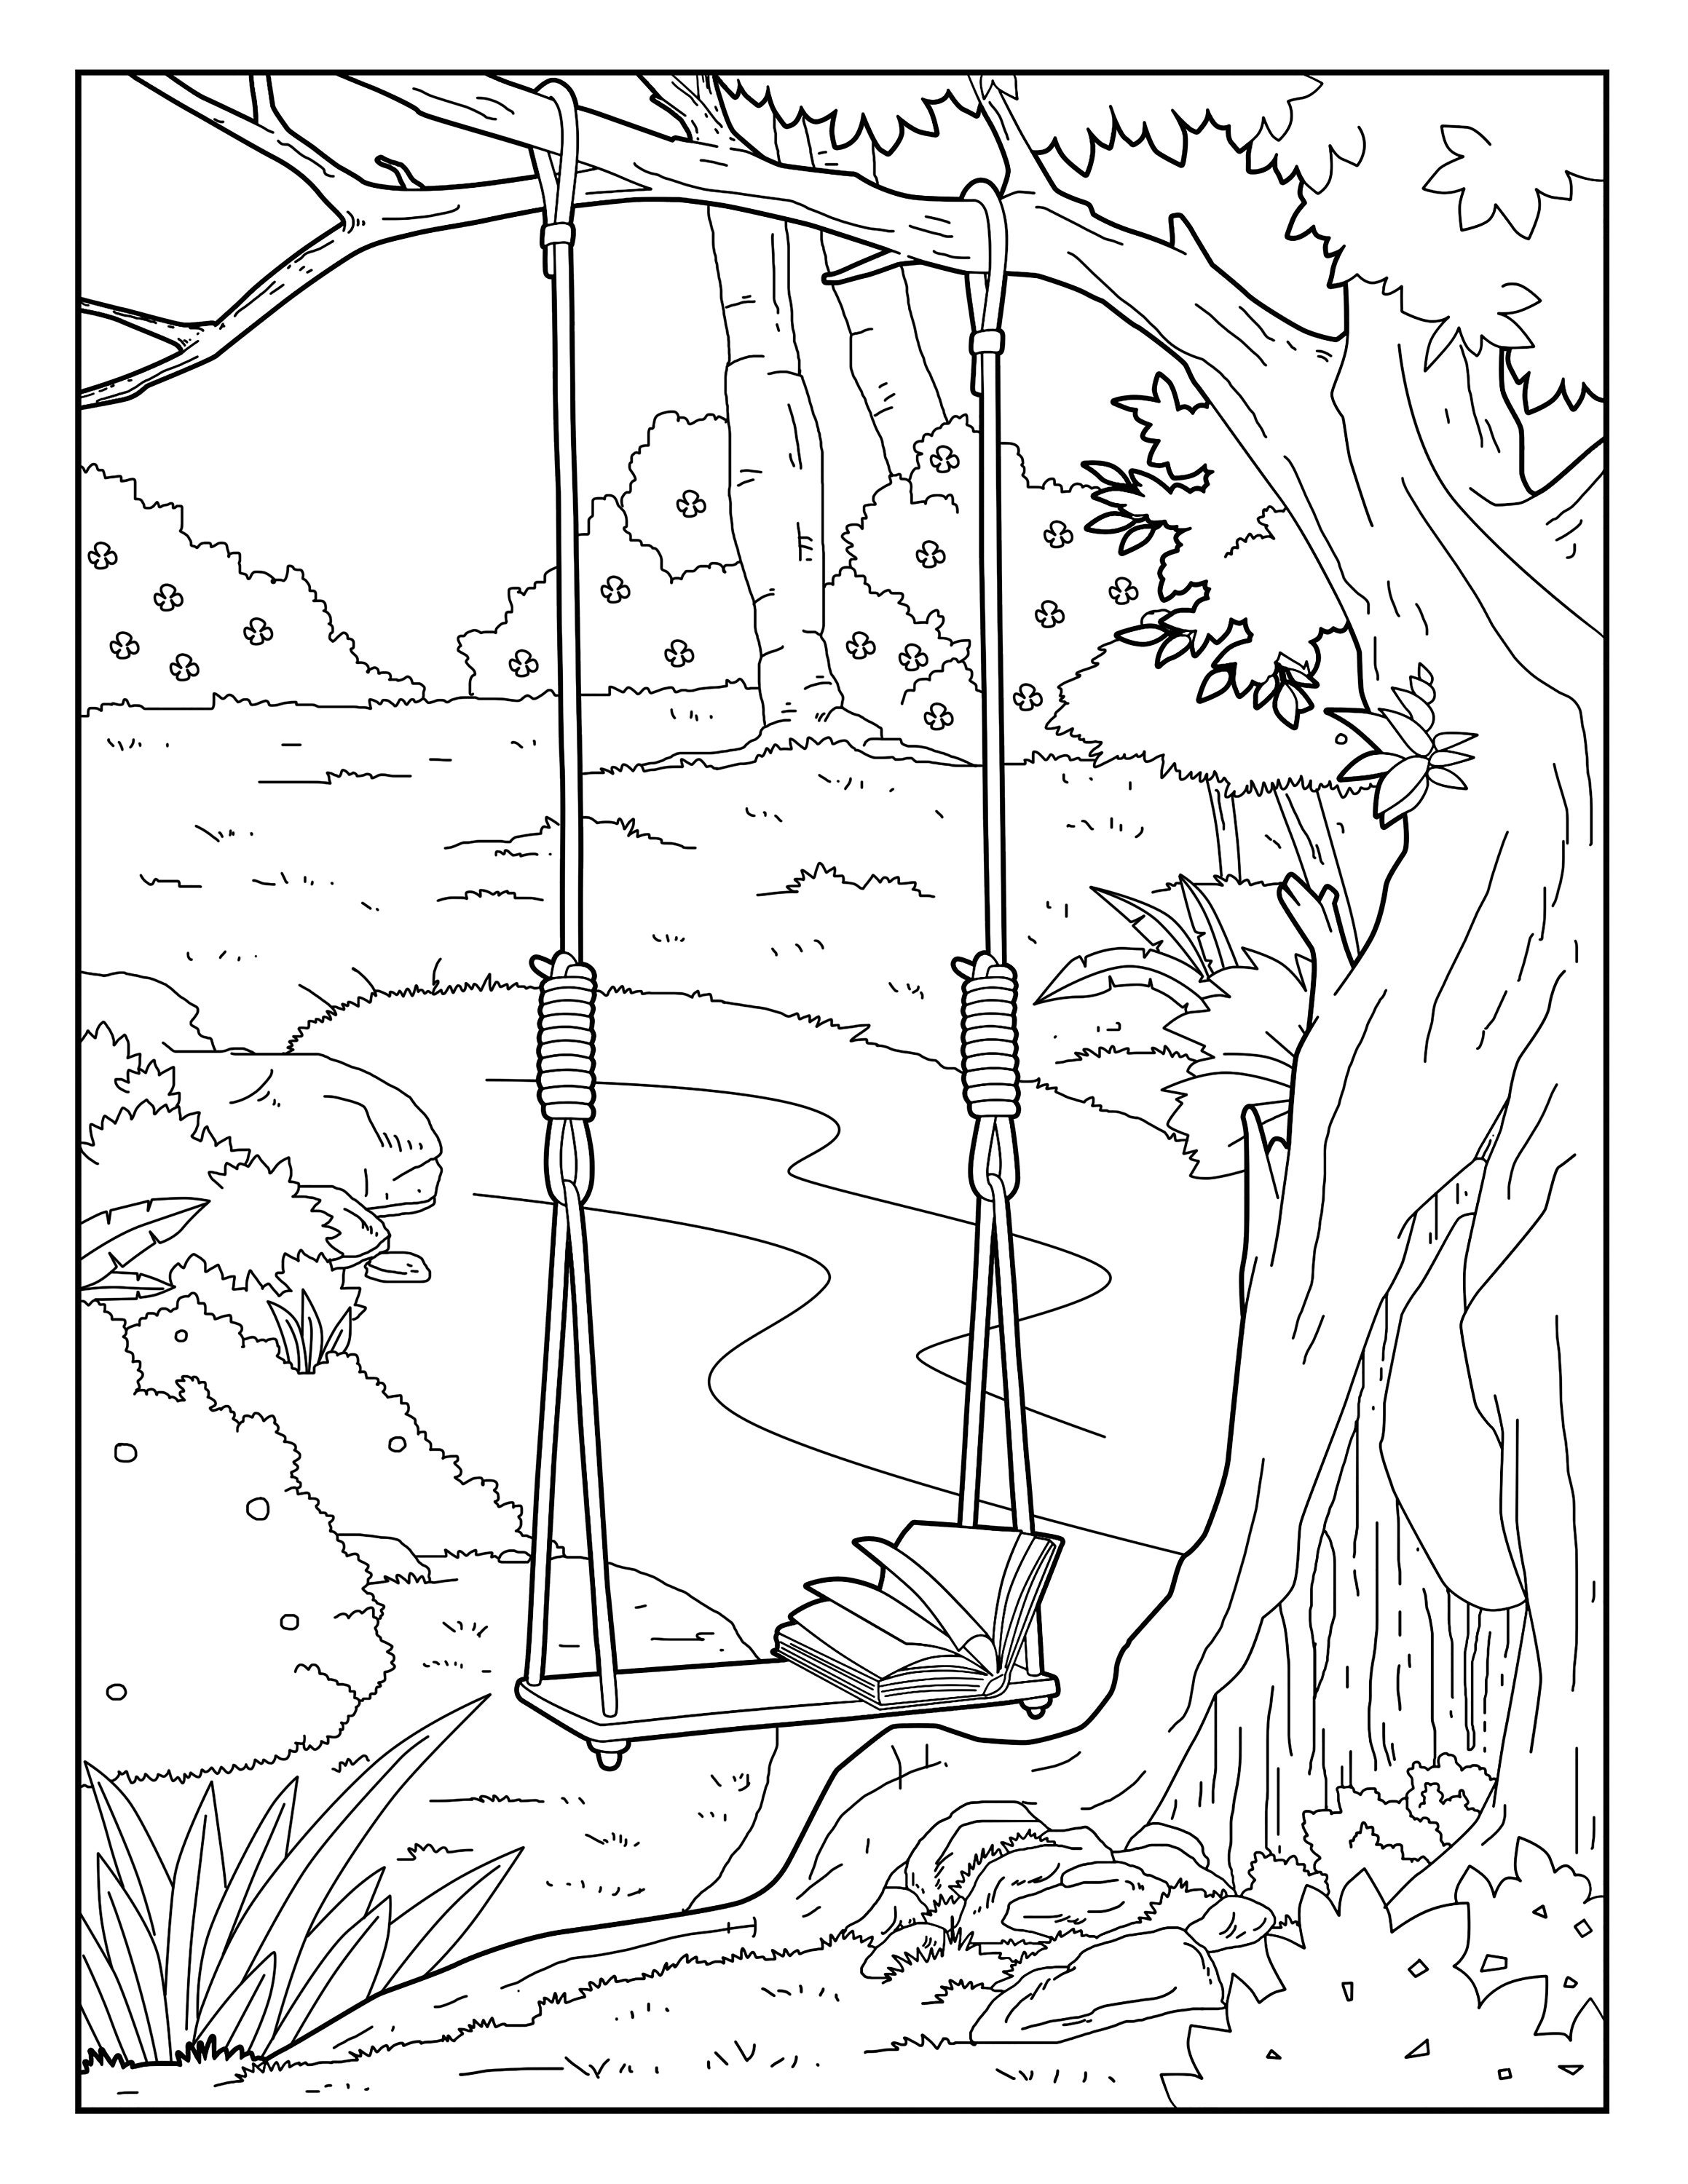 Garden swing garden gallery coloring pages for adults printable coloring page instant download pdf